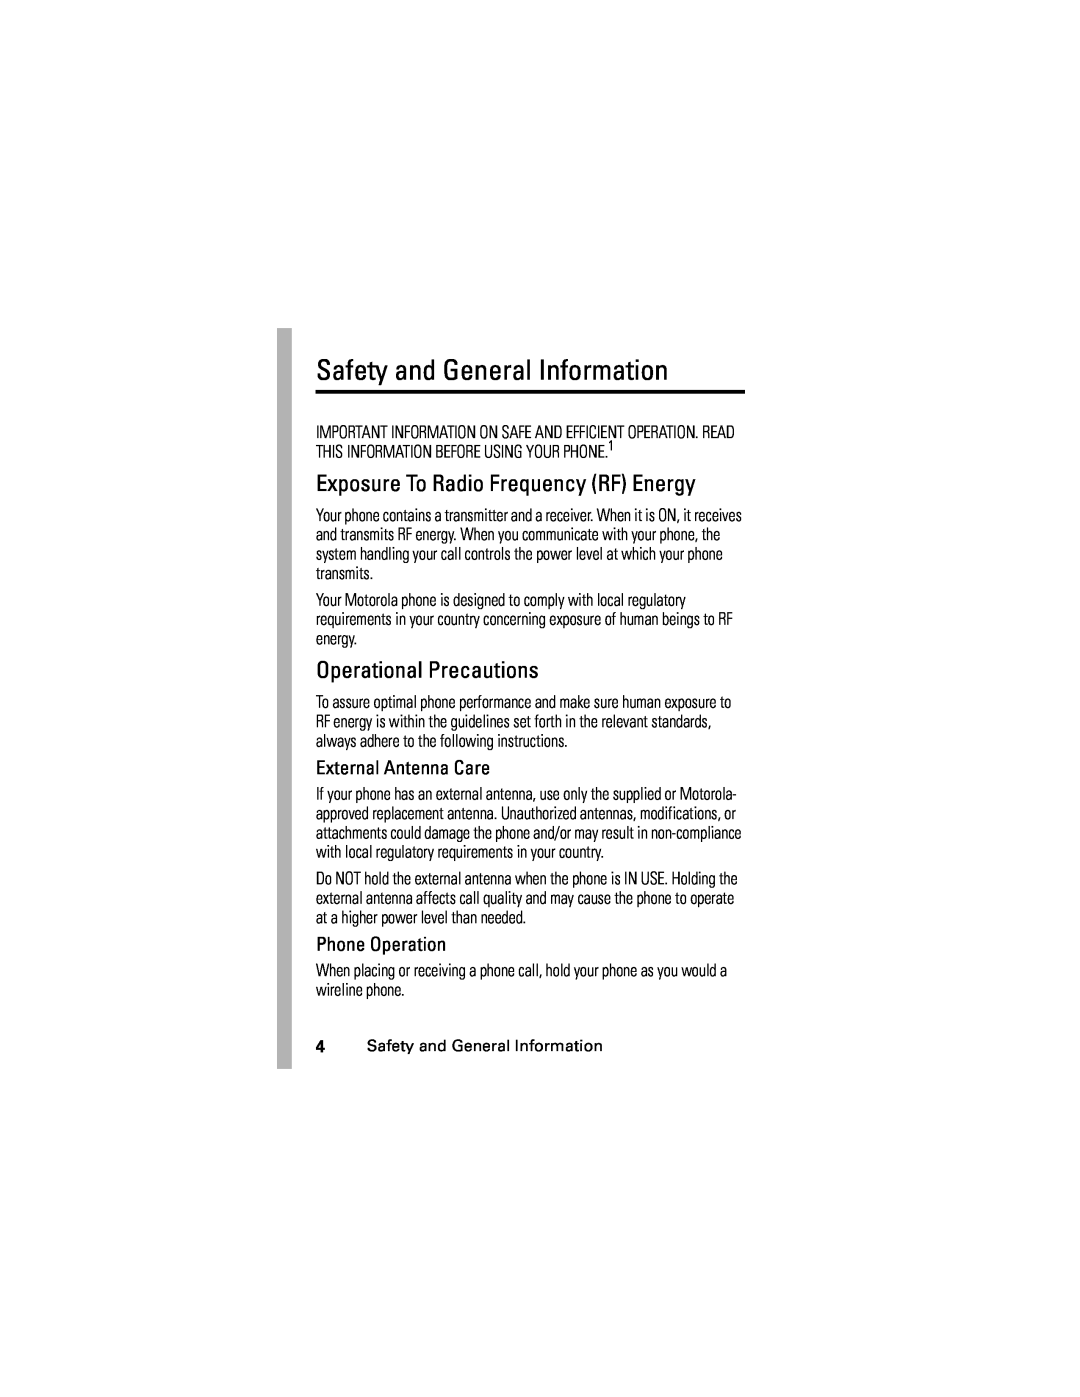 Motorola V635 manual Safety and General Information, Exposure To Radio Frequency RF Energy, Operational Precautions 